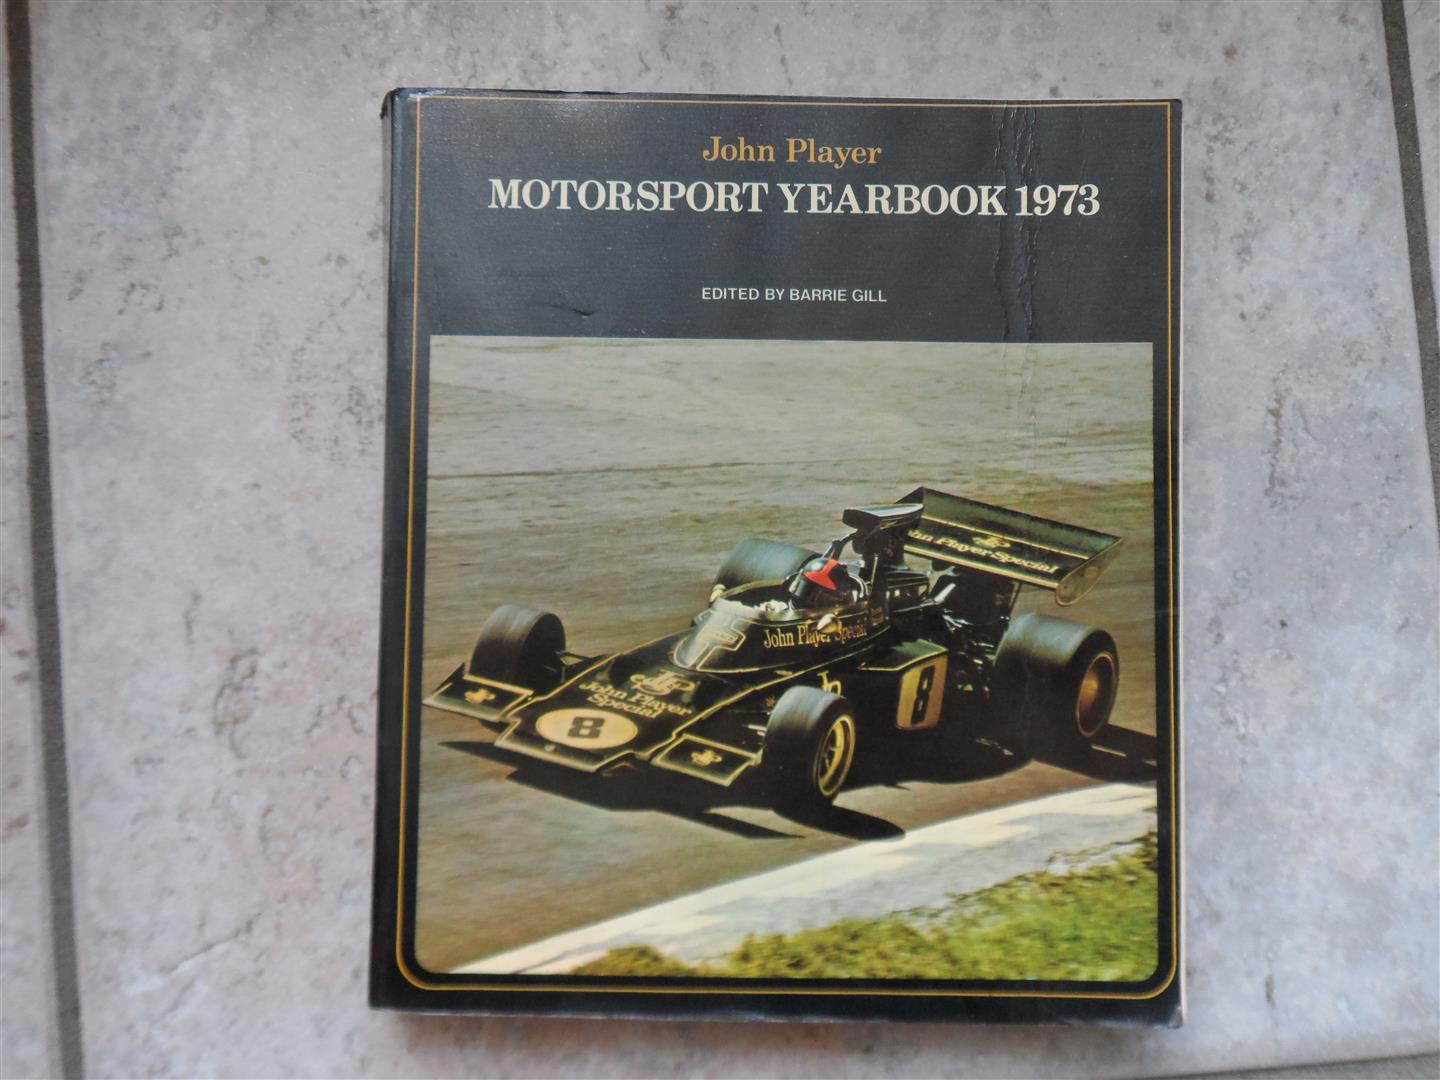 4x John Player motorsport yearbook Price is for all 4 main image